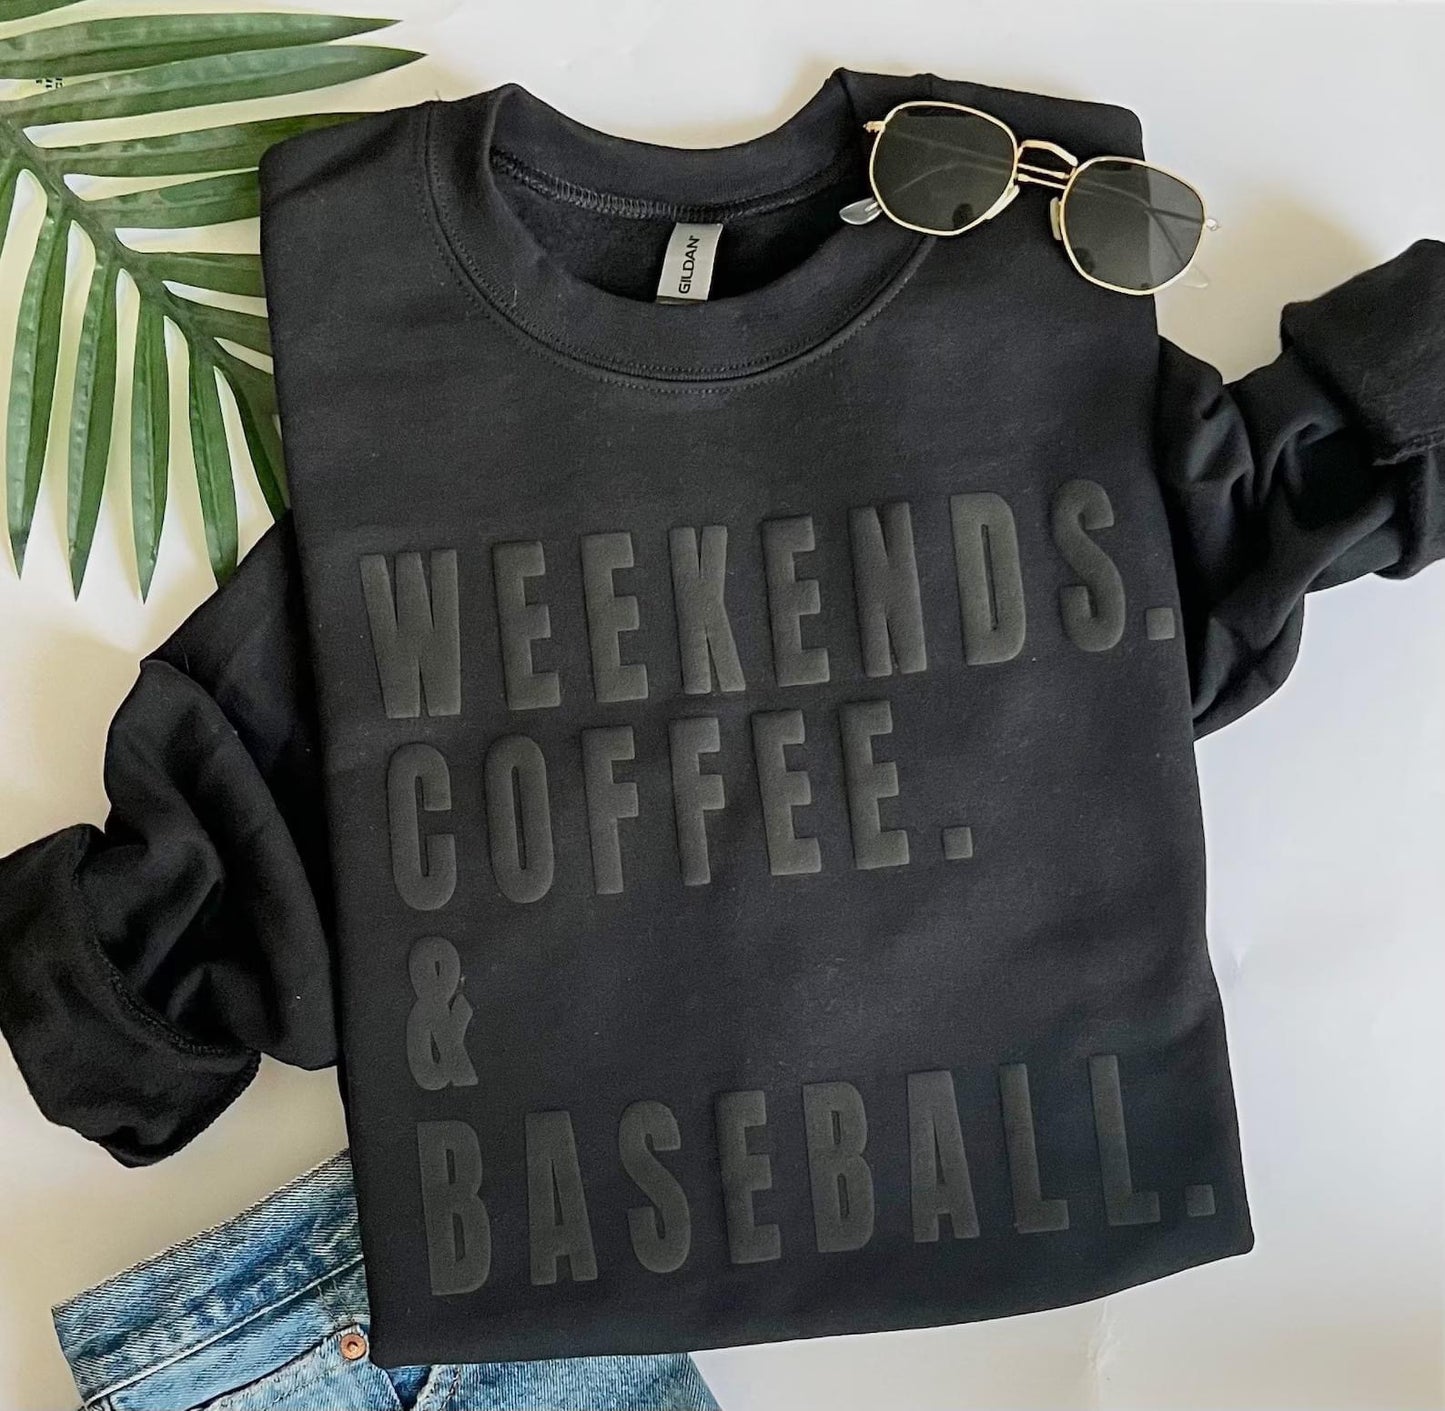 Weekends. Baseball. *Choose Your Color*